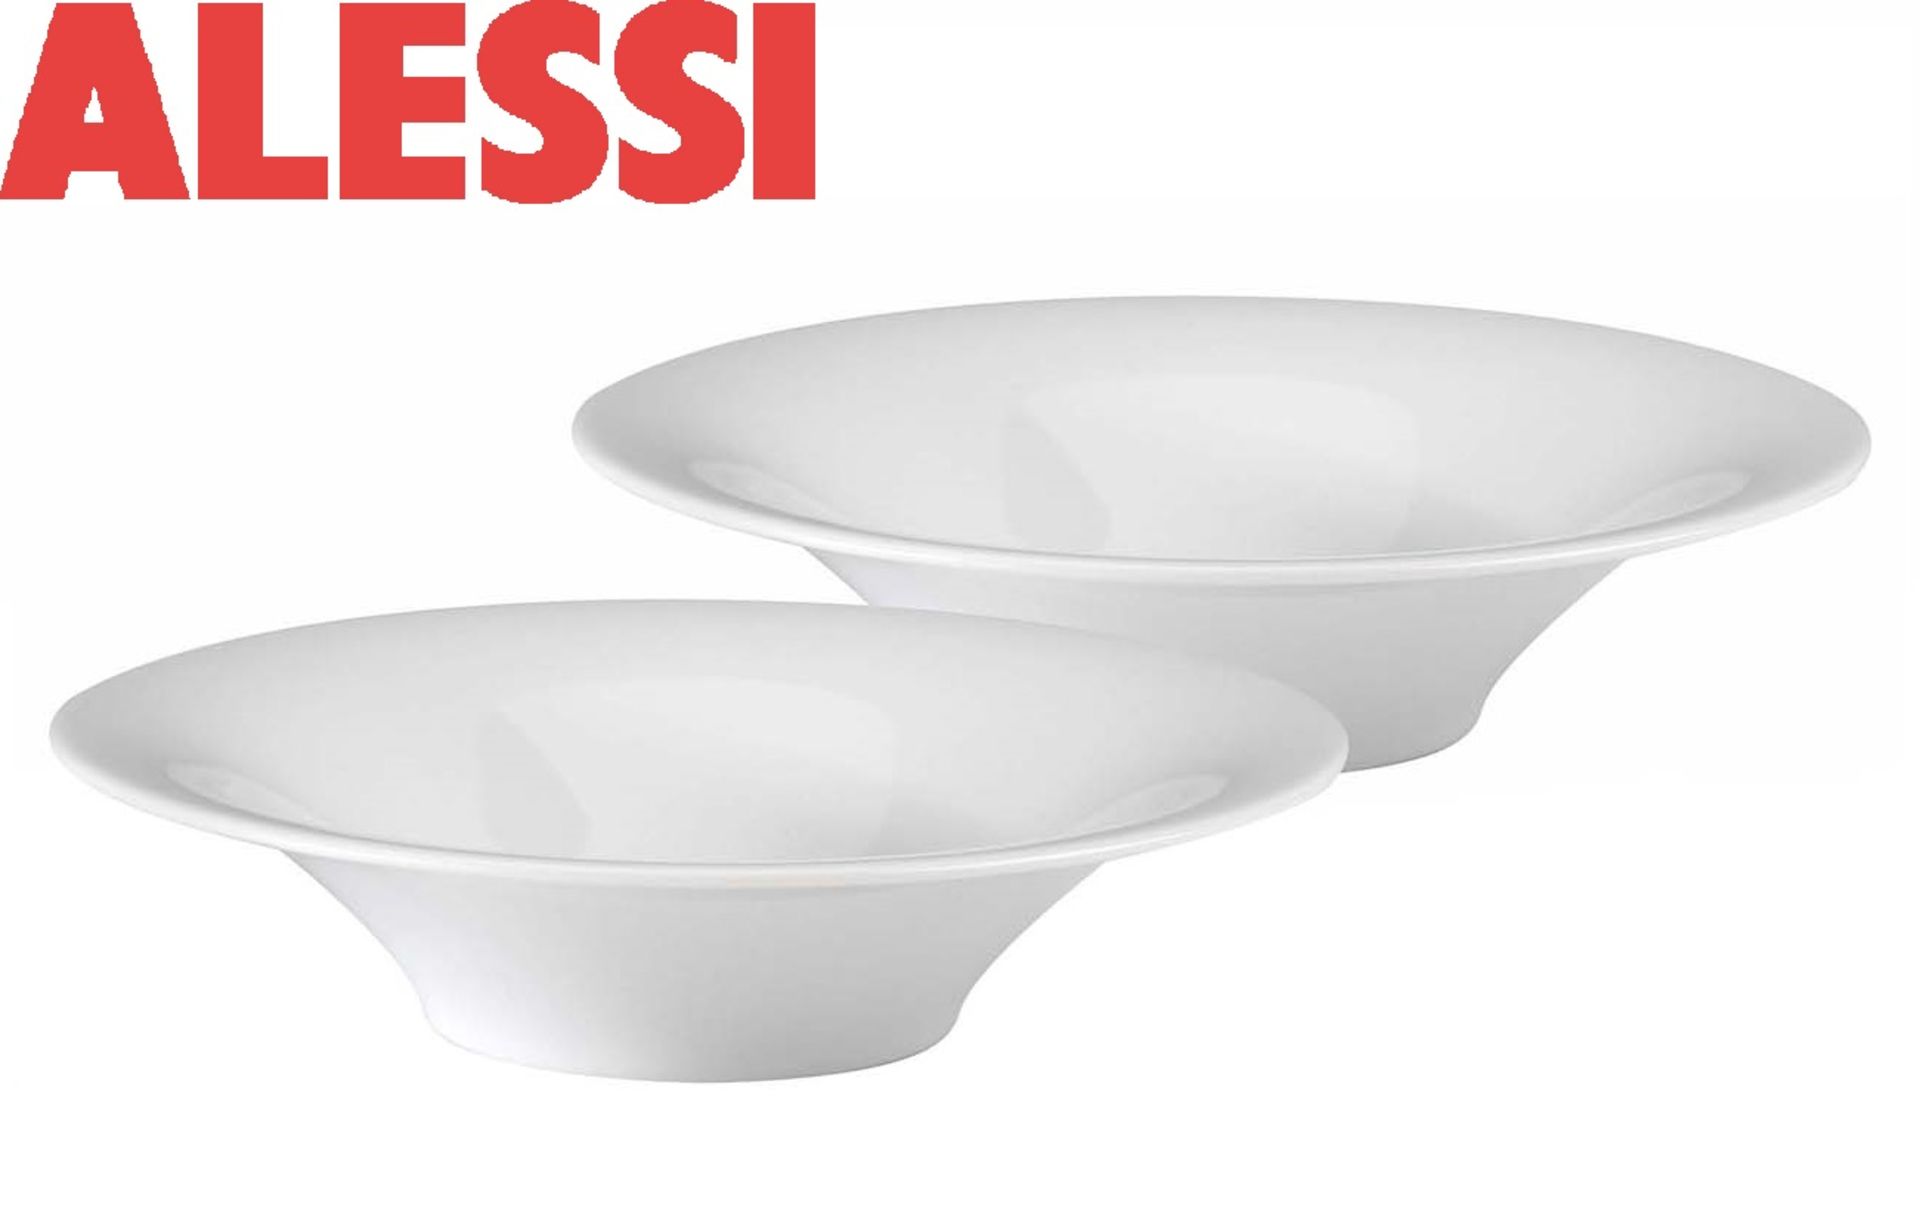 V *TRADE QTY* Brand New Alessi Ku Set of Two 21.9cm Bowls (£39.99 MAHAHome) X 6 YOUR BID PRICE TO BE